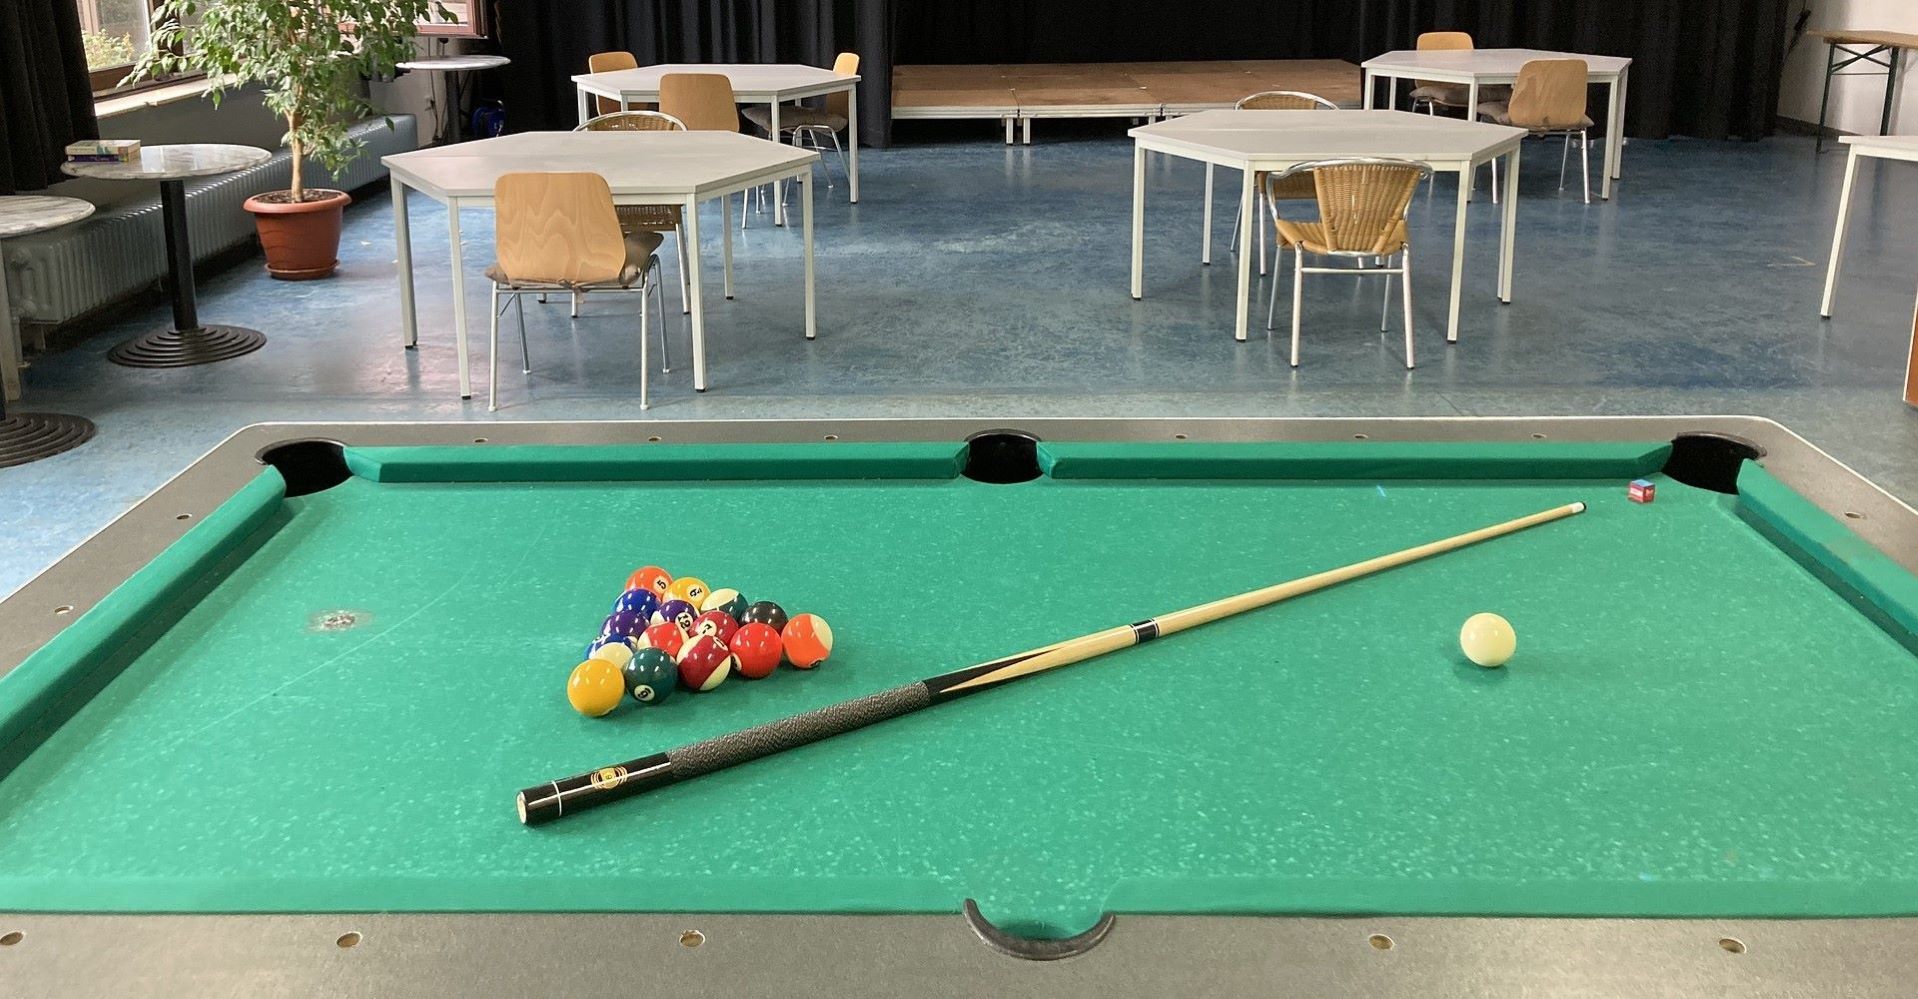 Display of a pool table size in a hall.